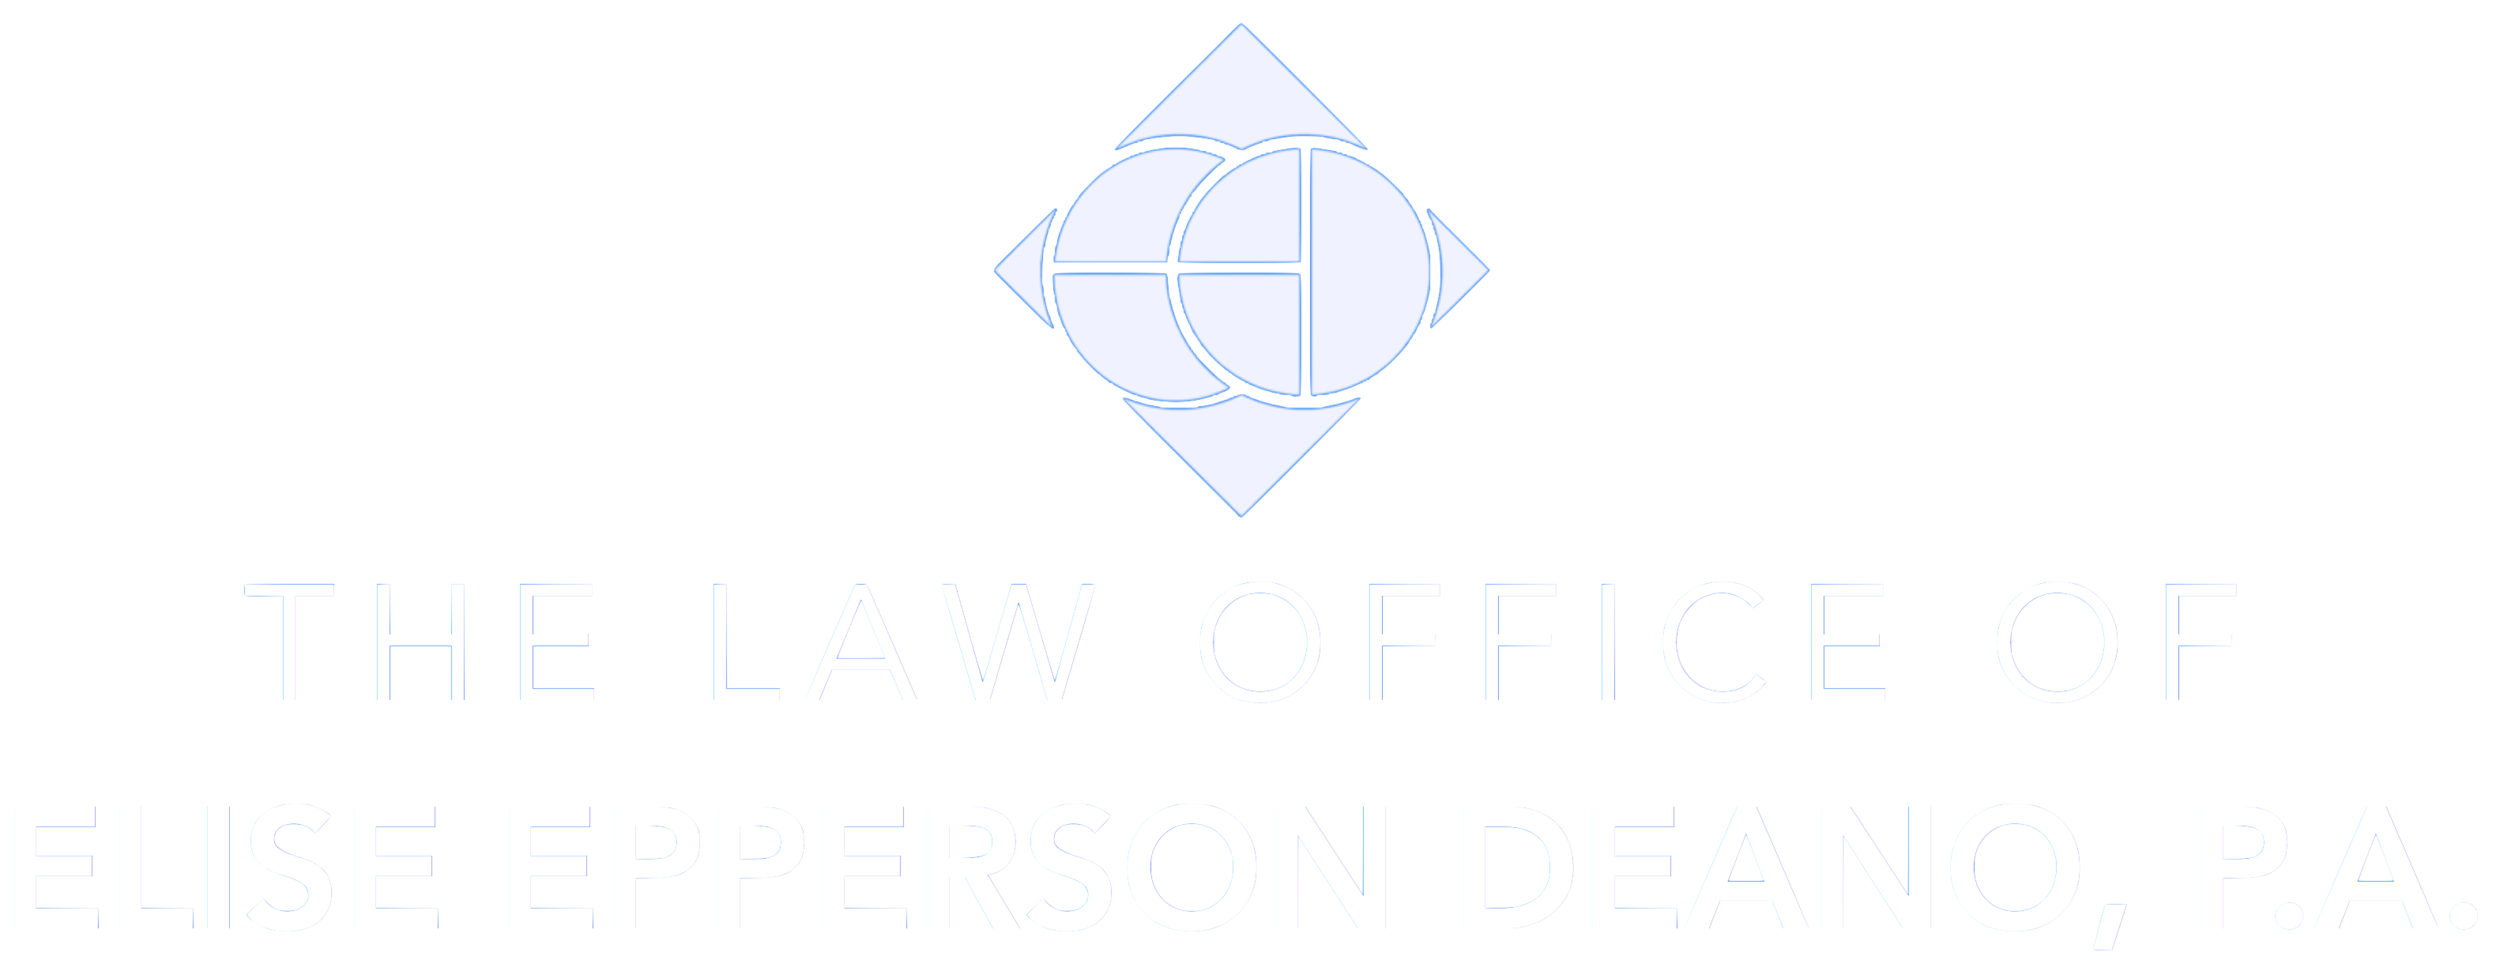 The Law Office of Elise Epperson Deano